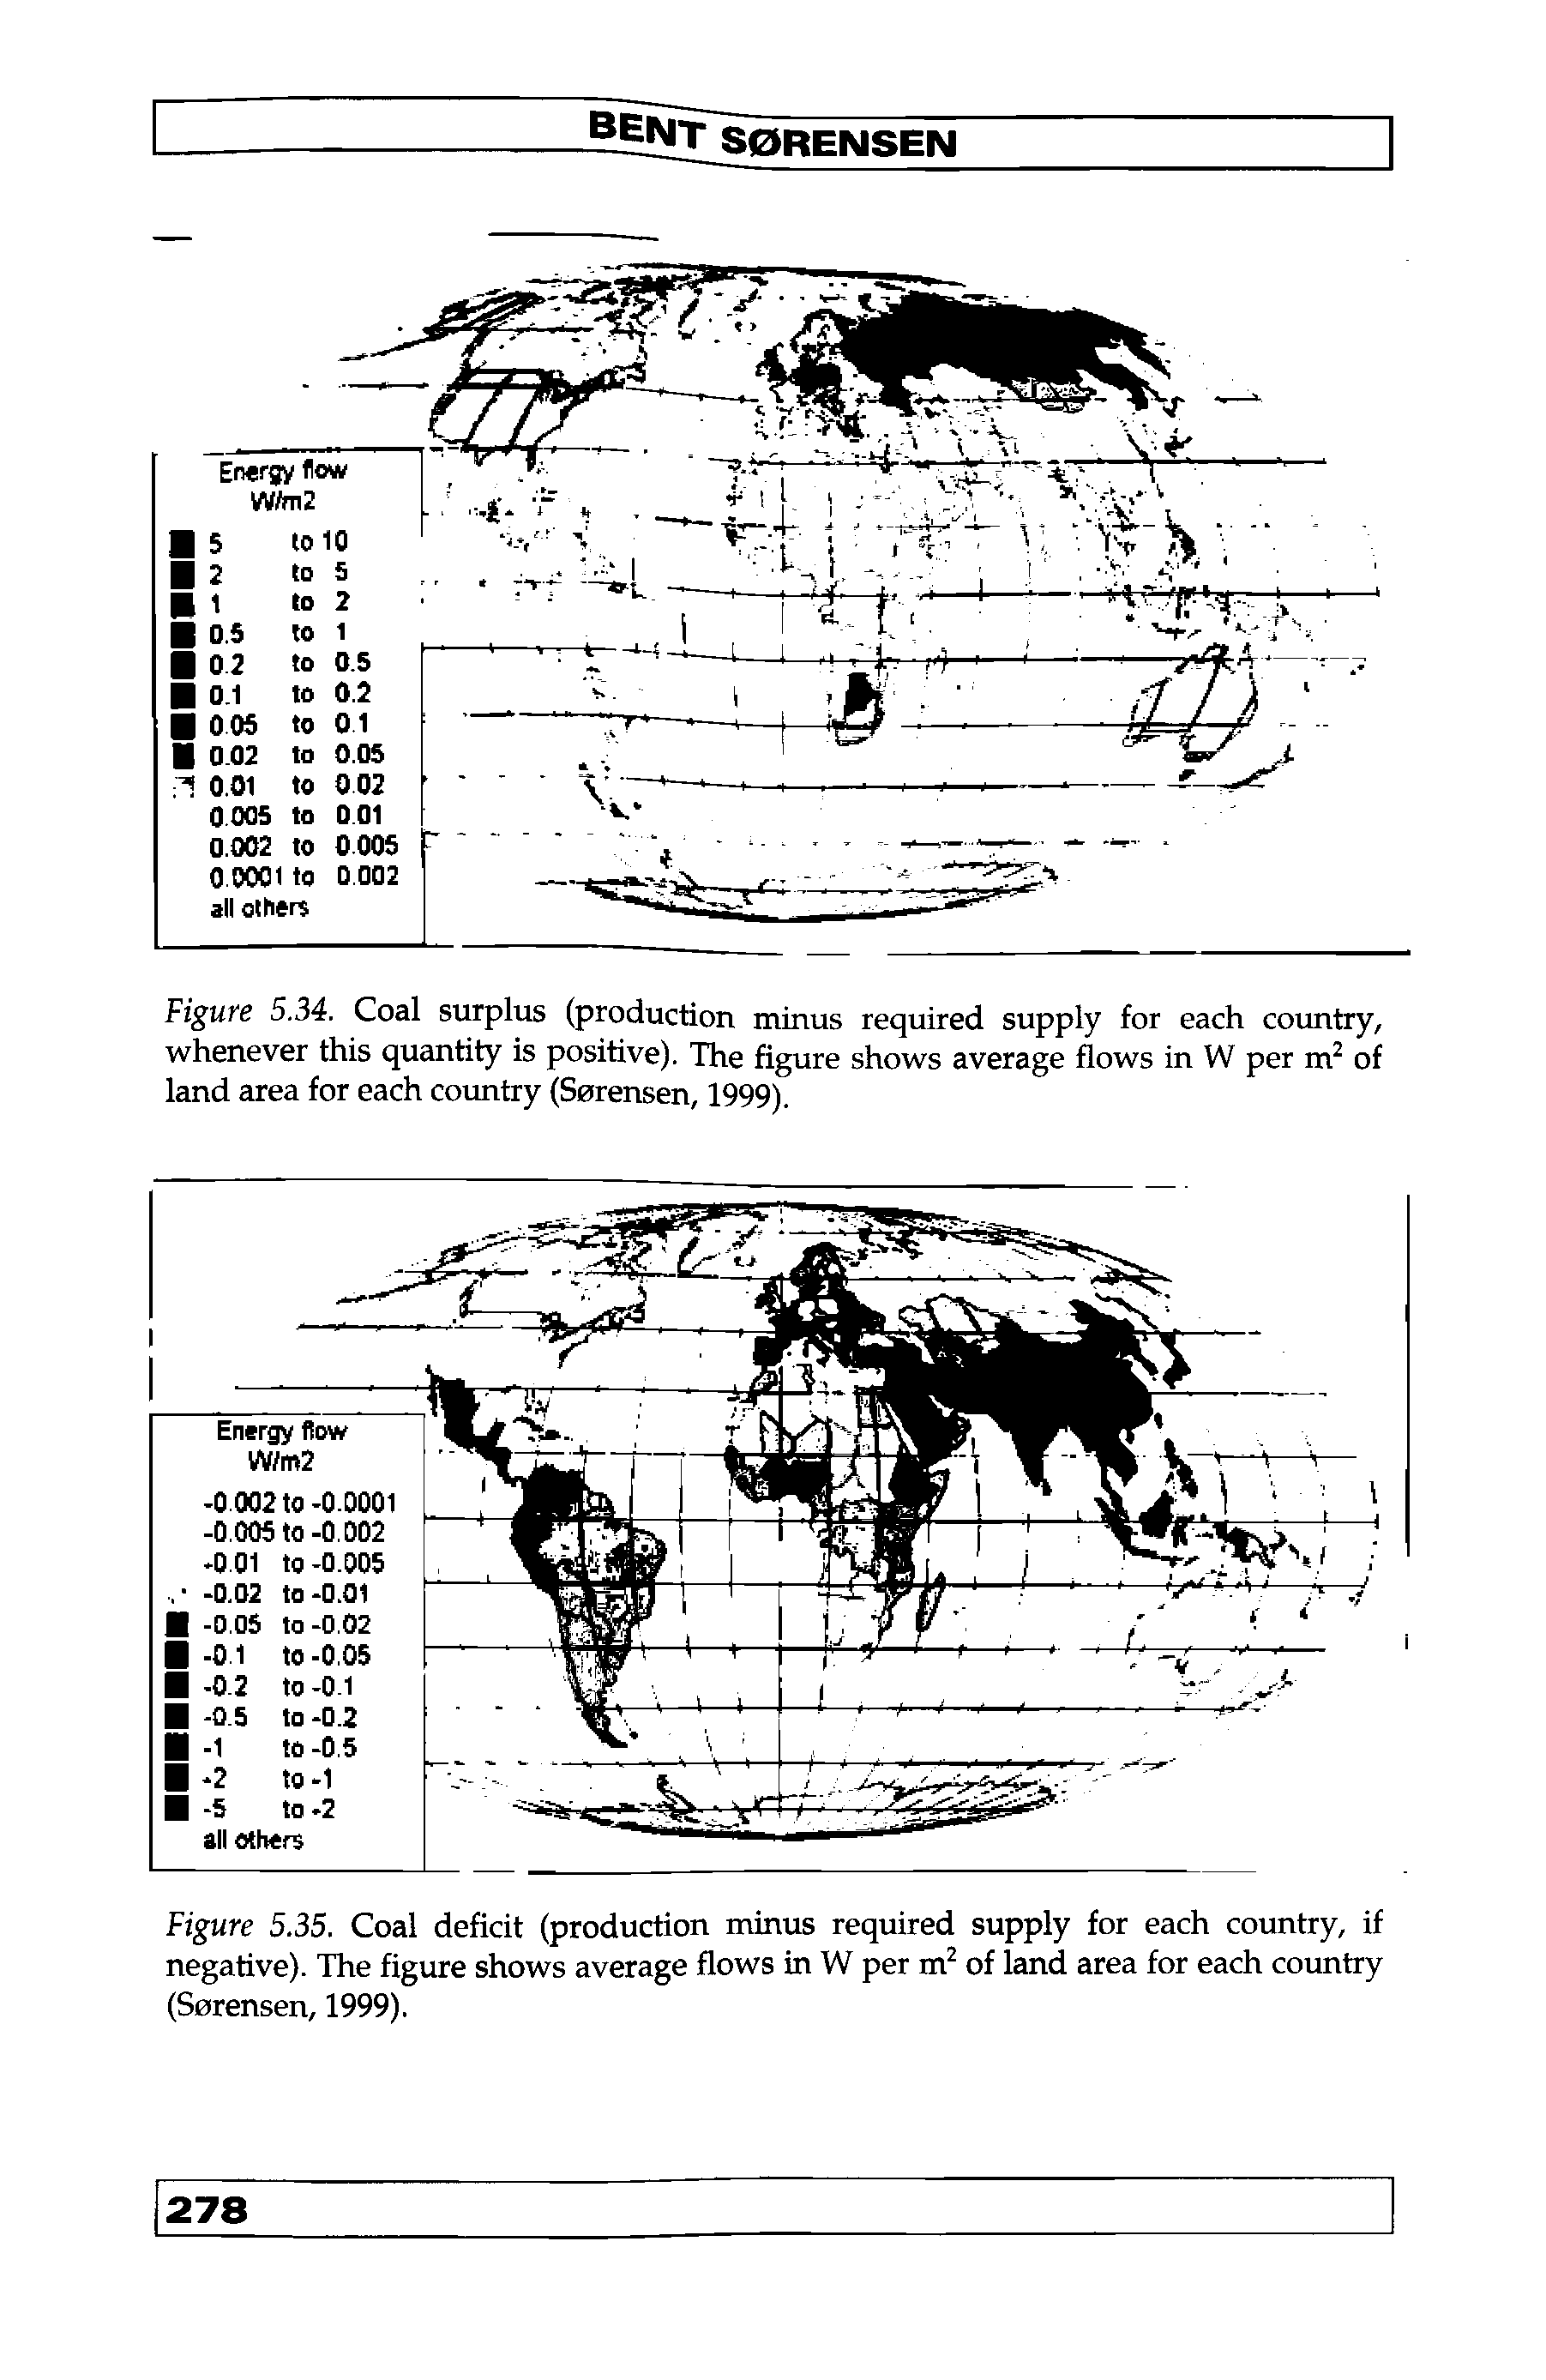 Figure 5.34. Coal surplus (production minus required supply for each country, whenever this quantity is positive). The figure shows average flows in W per of land area for each country (Sorensen, 1999).